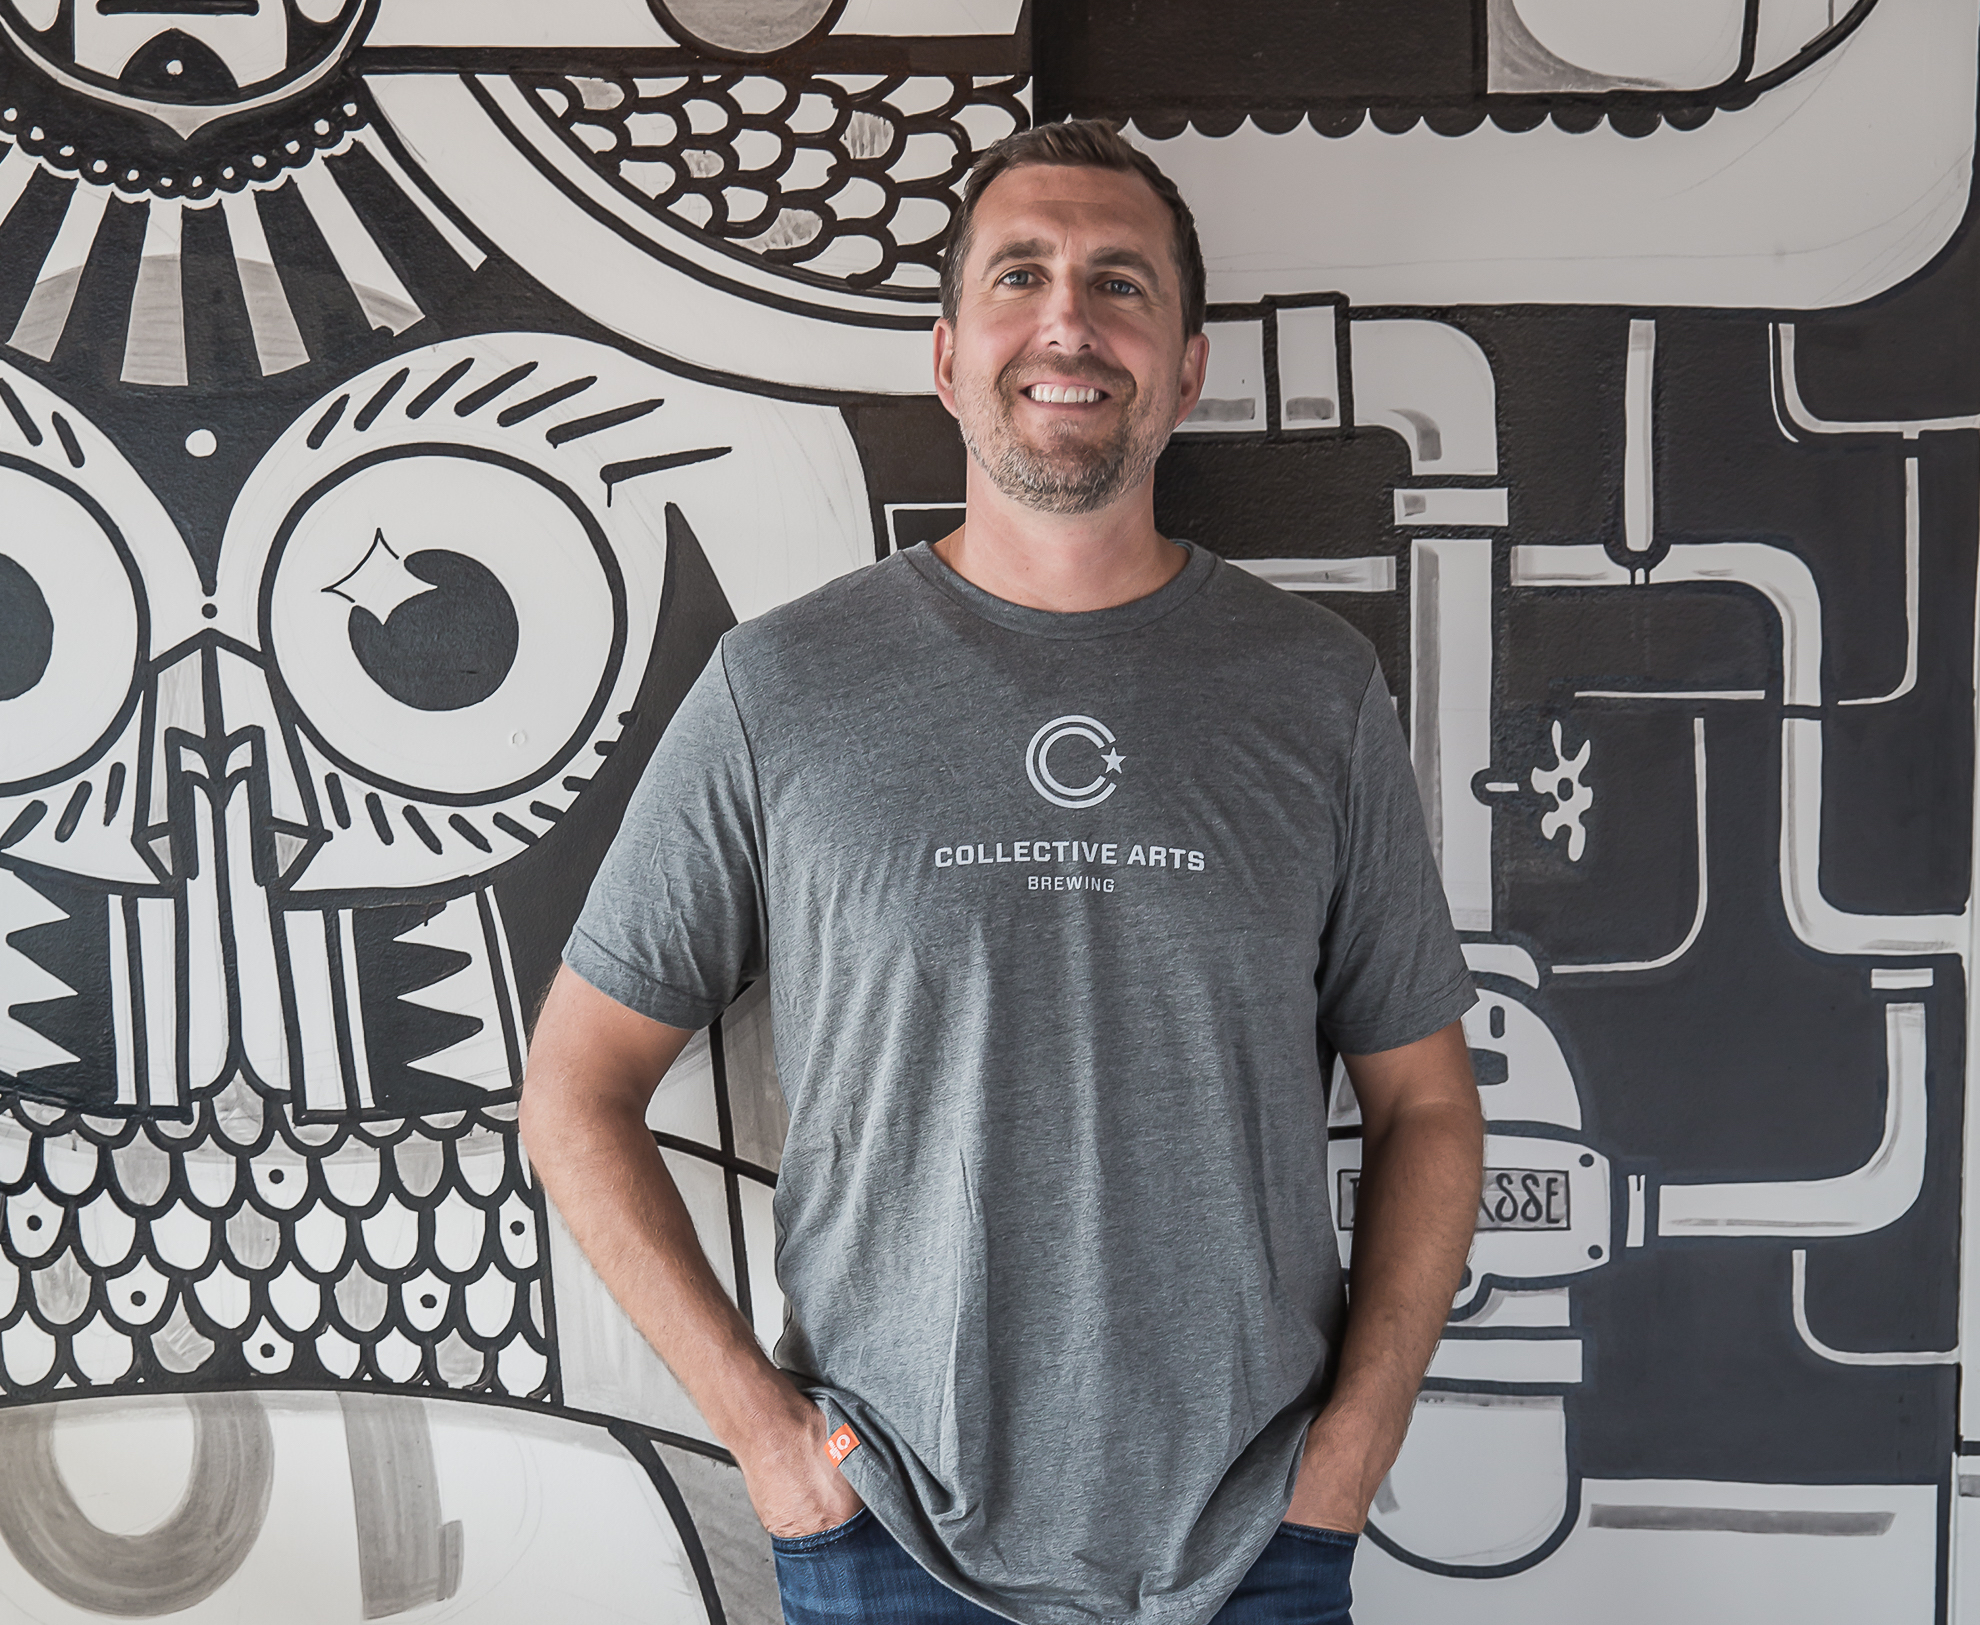 Art, Ale and Community Building with Collective Arts Brewing’s Matt Johnston